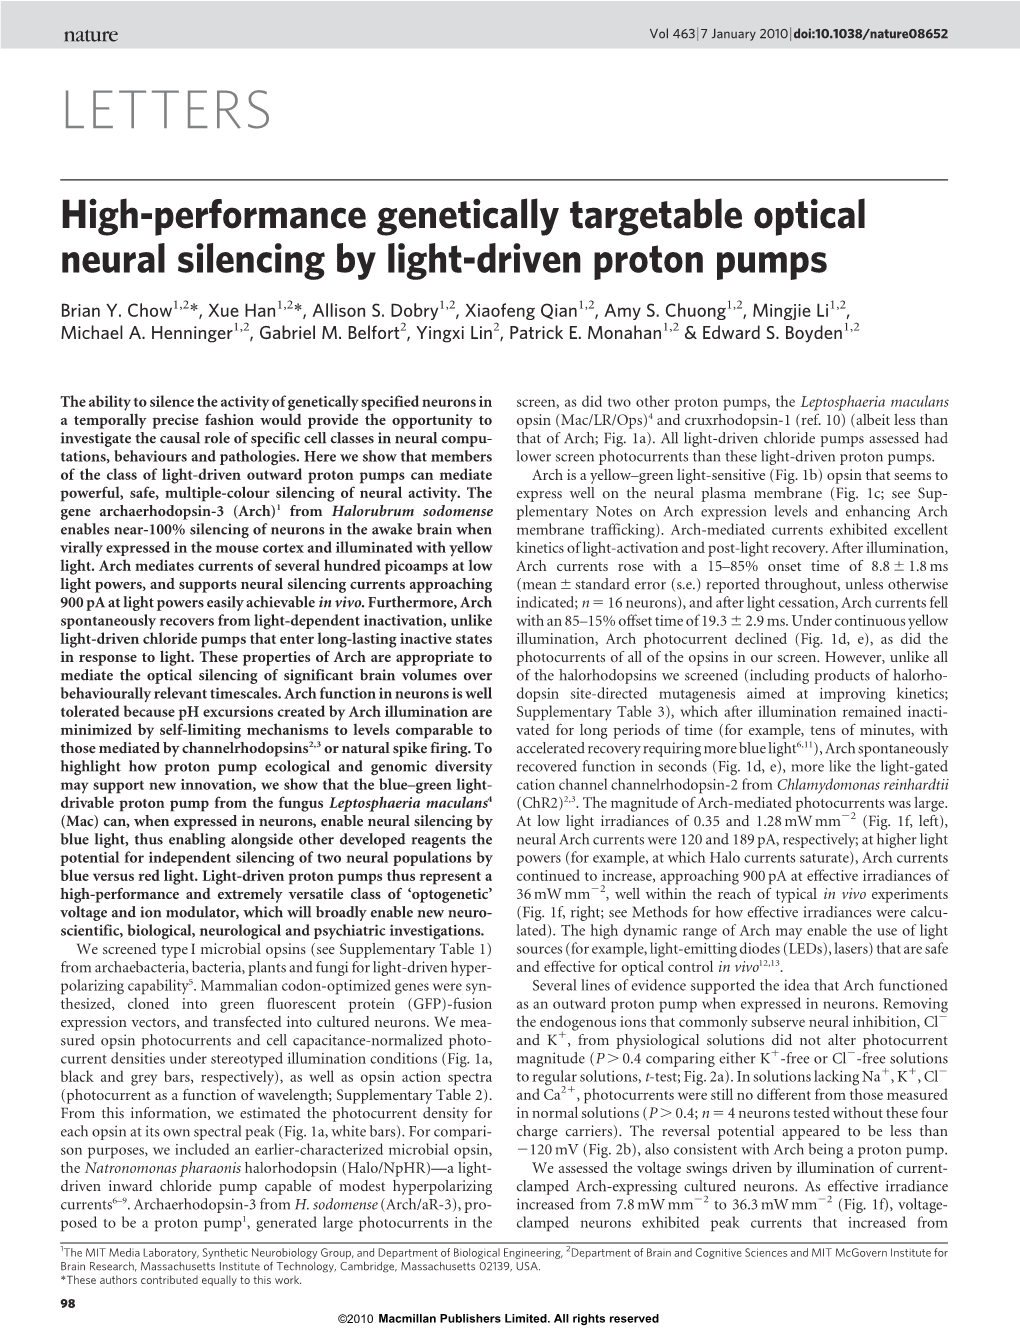 High-Performance Genetically Targetable Optical Neural Silencing by Light-Driven Proton Pumps